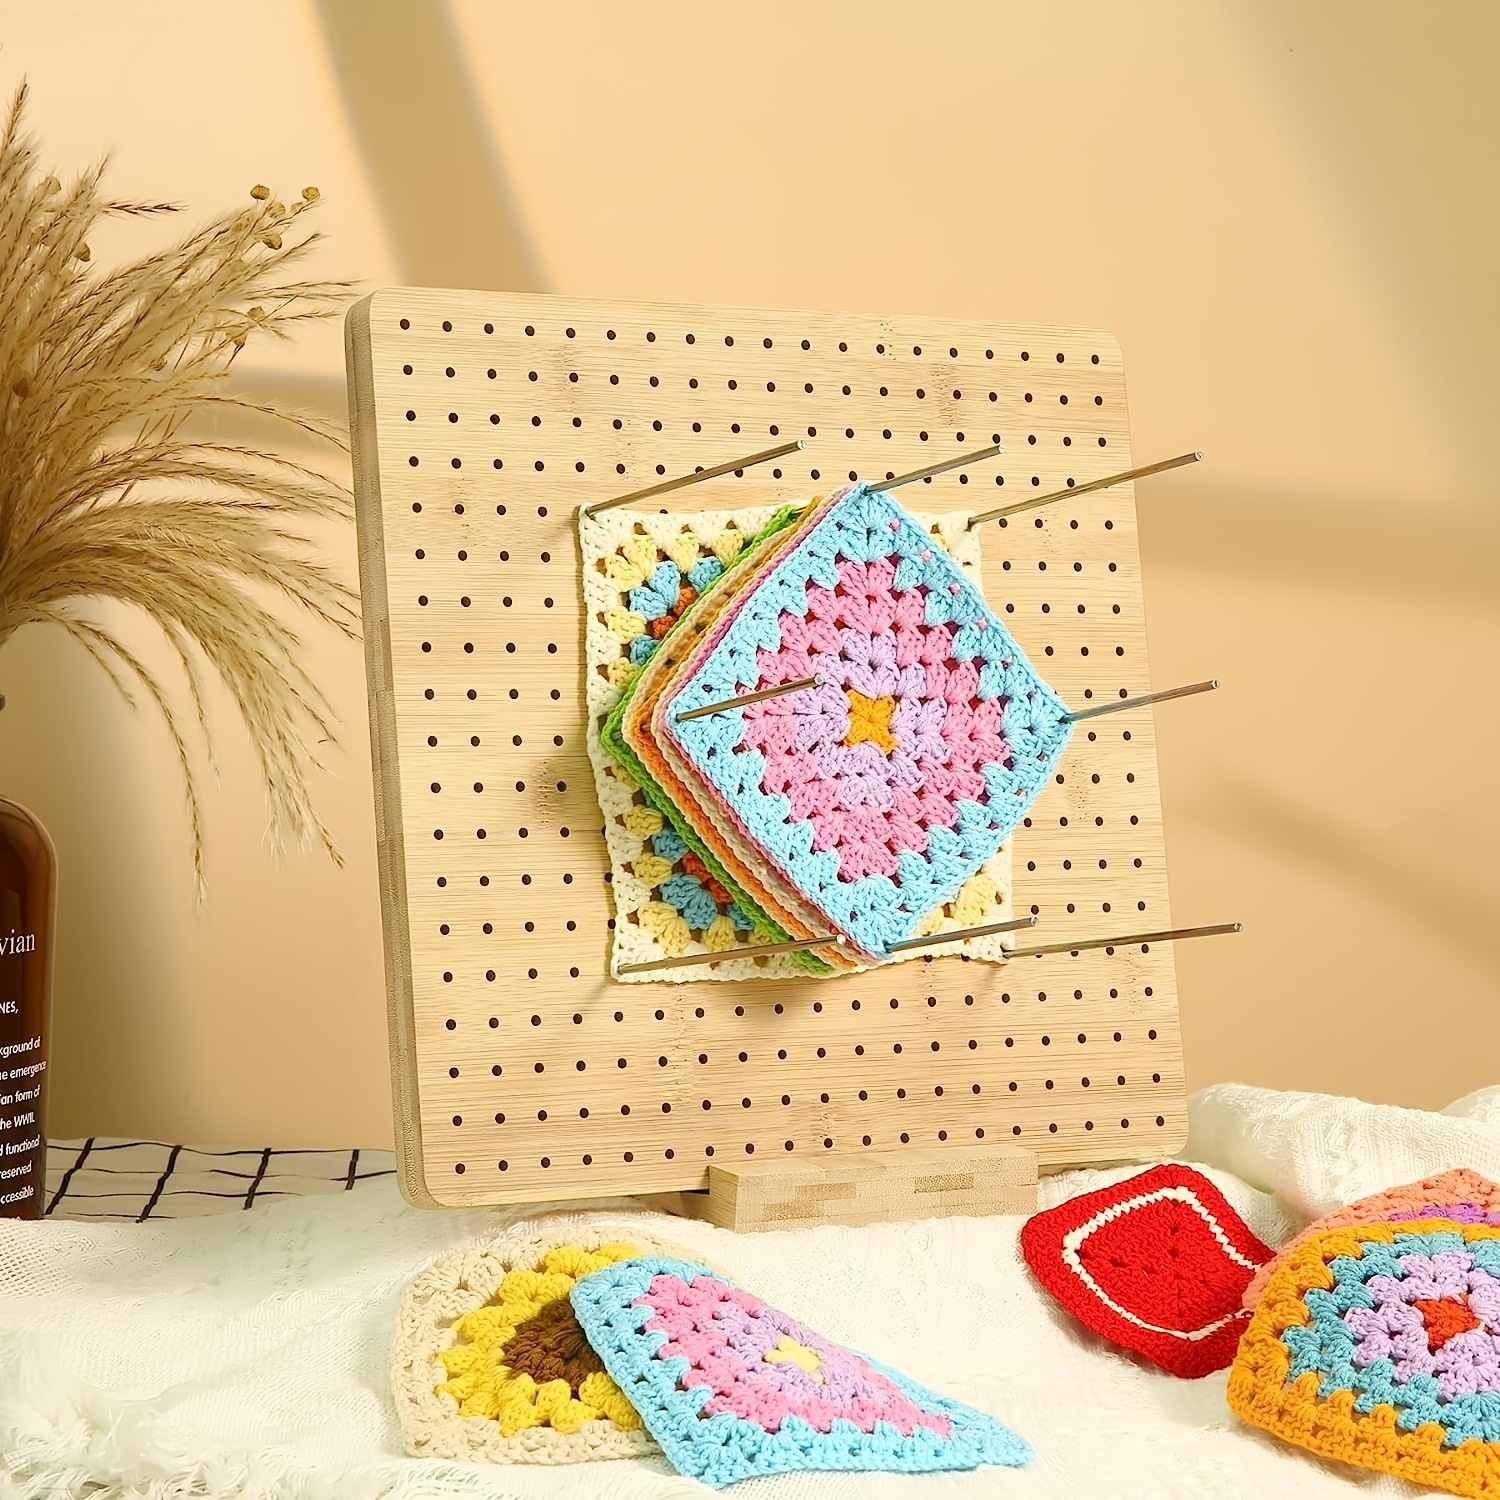 9.25 Inches Rubber Wooden Crochet Blocking Board,Crochet Accessories with  20 Pcs Steel Pins for Knitting Crochet and Granny Squares,Blocking Board  for